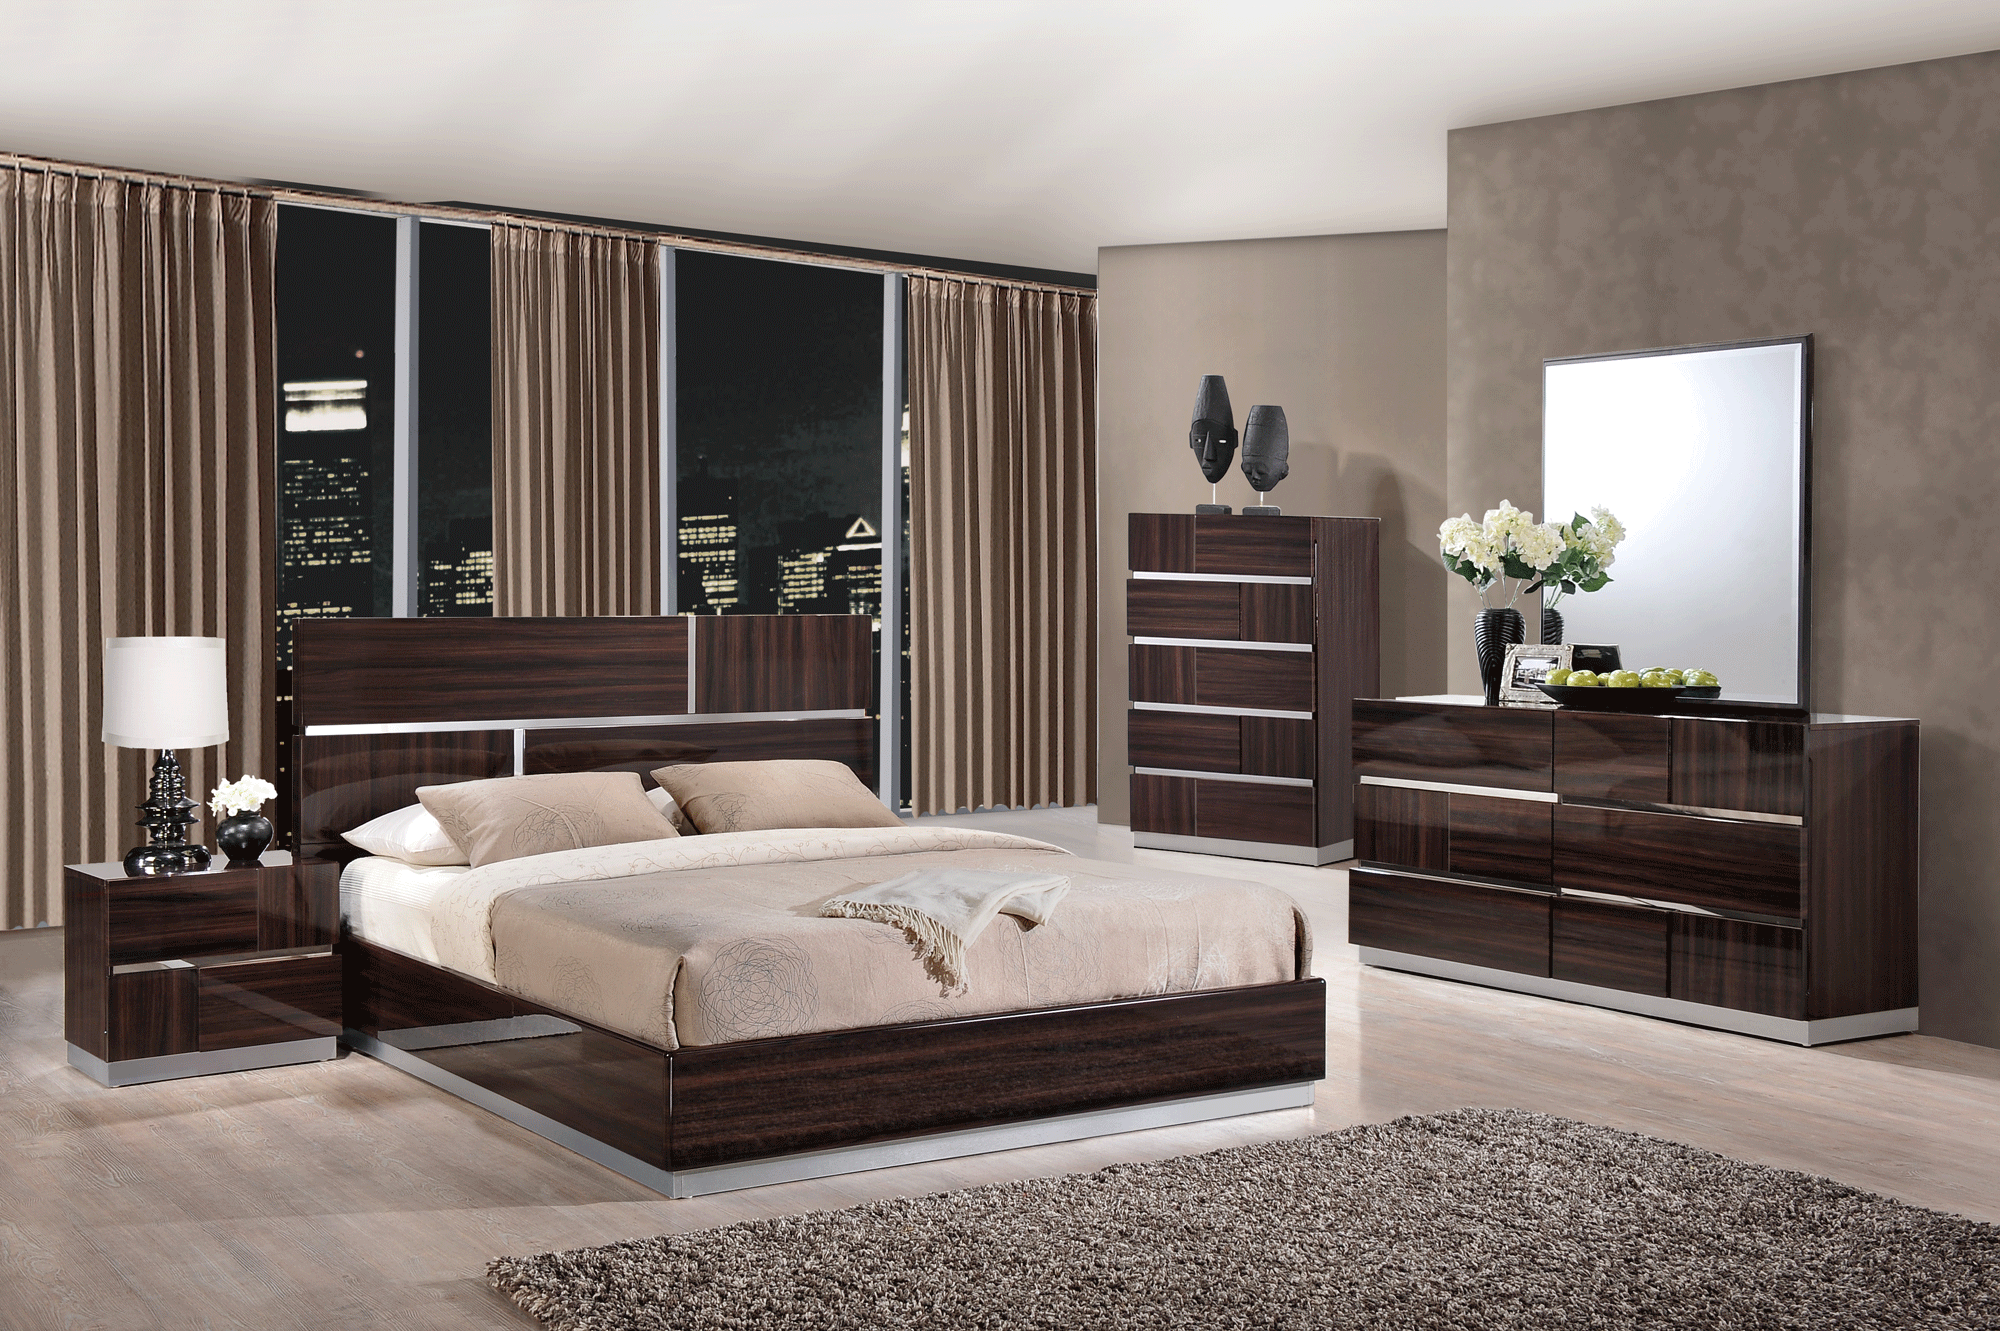 tribeca bedroom furniture collection